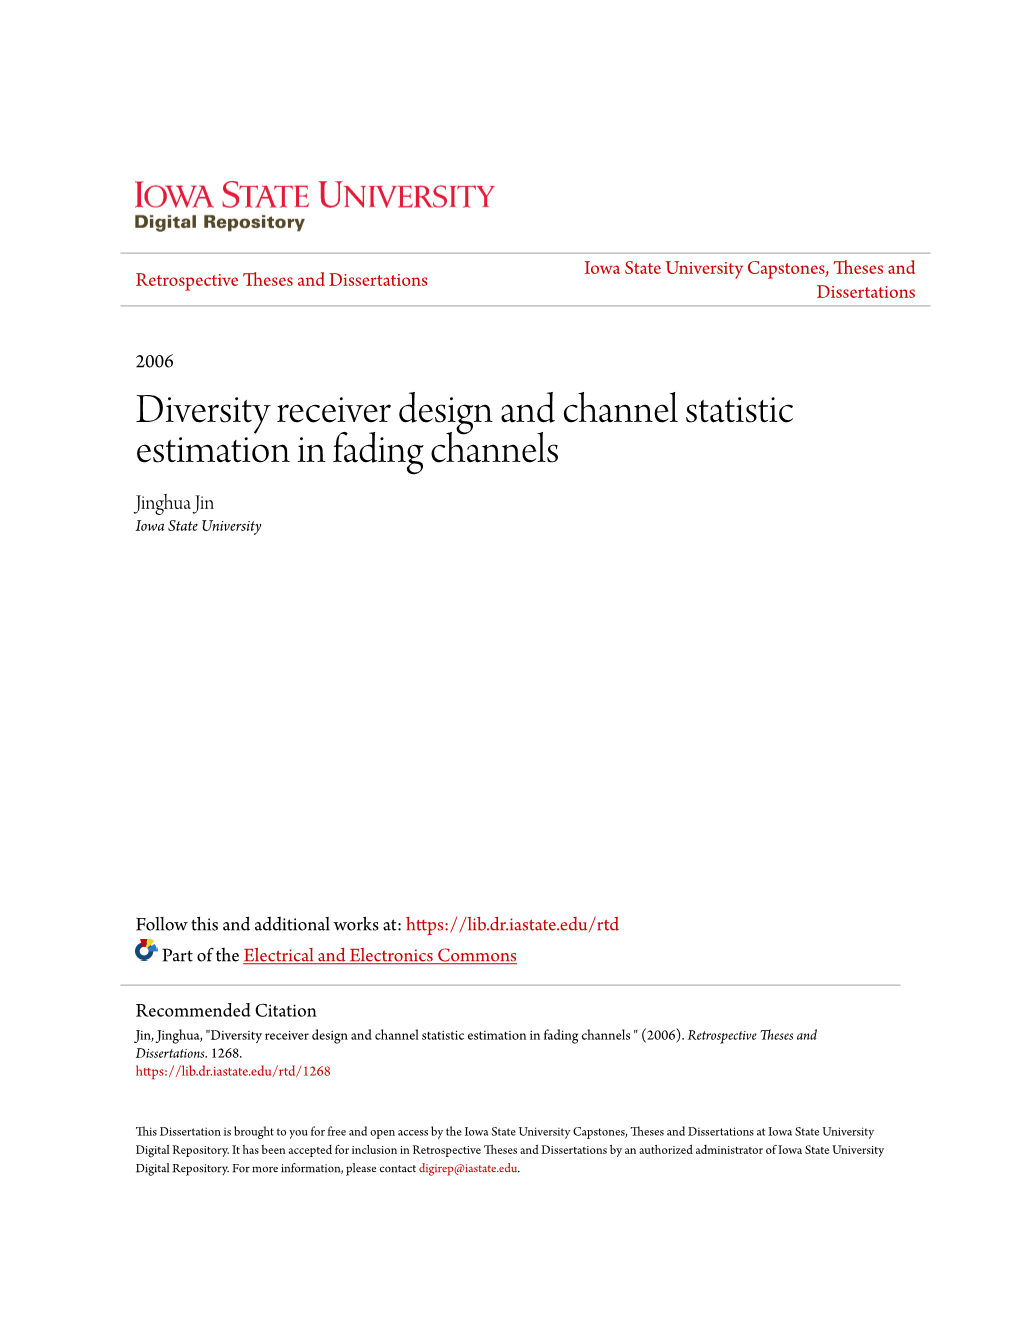 Diversity Receiver Design and Channel Statistic Estimation in Fading Channels Jinghua Jin Iowa State University